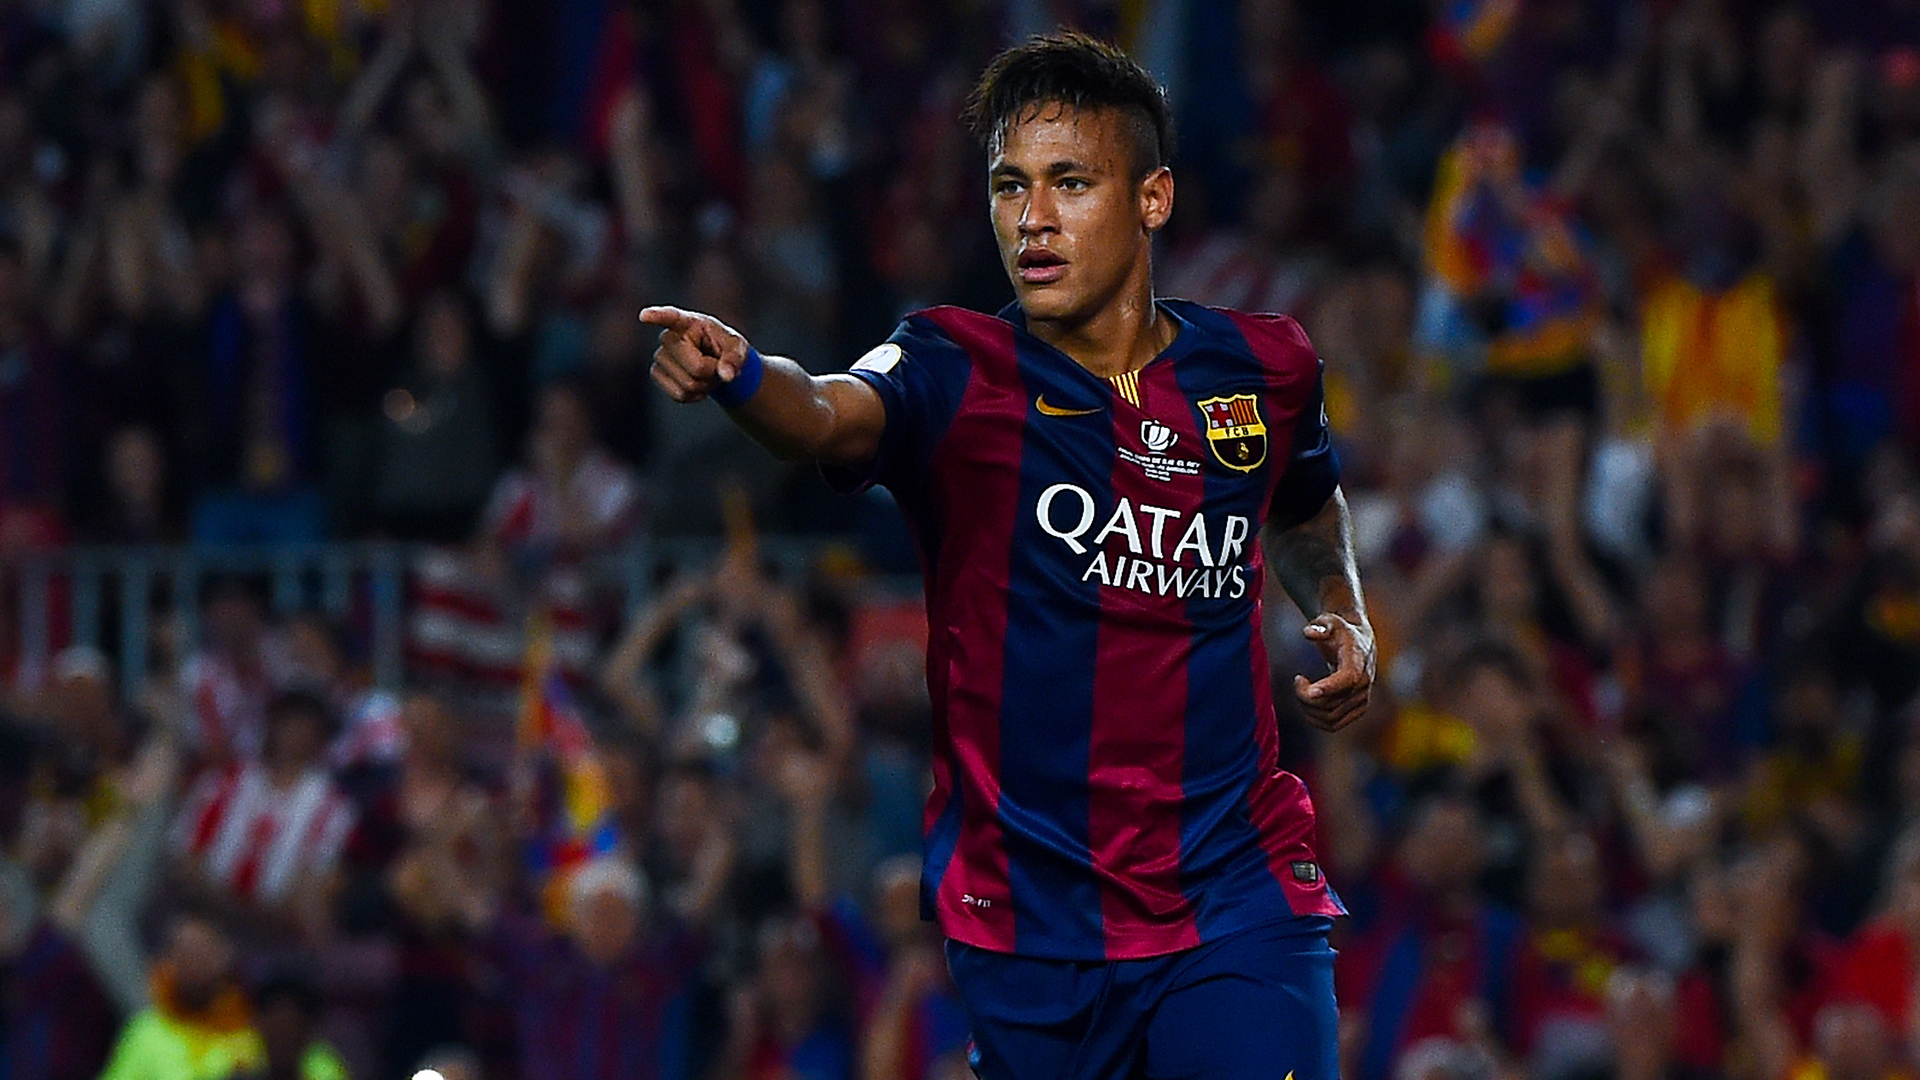 BARCELONA, SPAIN - MAY 30: Neymar of FC Barcelona celebrates after scoring his team's second goal during the Copa del Rey Final match between FC Barcelona and Athletic Club at Camp Nou on May 30, 2015 in Barcelona, Spain. (Photo by David Ramos/Getty Images)